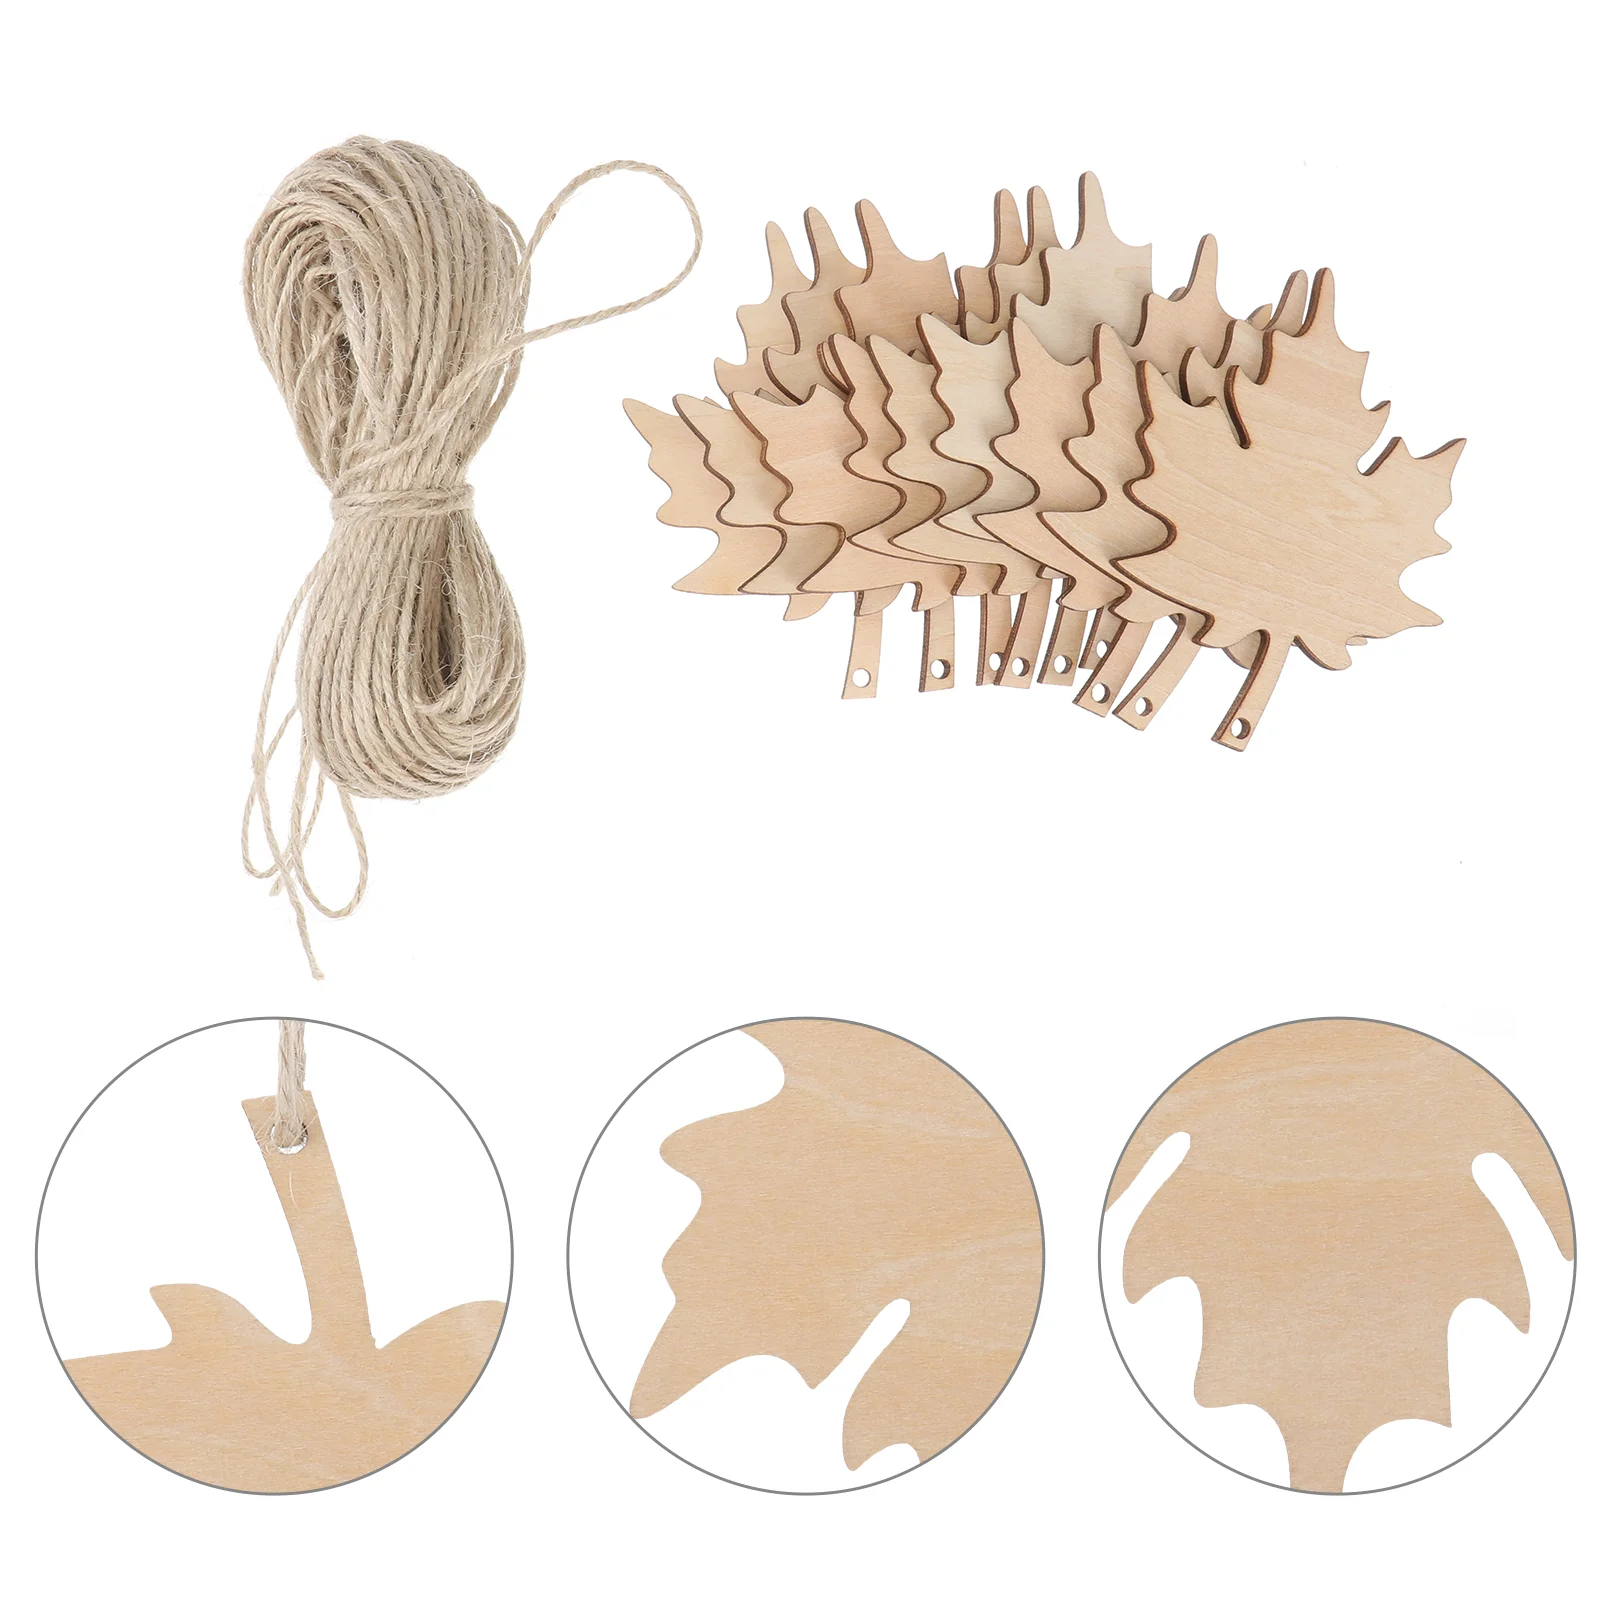 

21 PCS Maple Leaf Tag Wooden DIY Crafts Artificial Cutouts Christmas Decorations Outdoor Fall Leaves Ornaments Blank